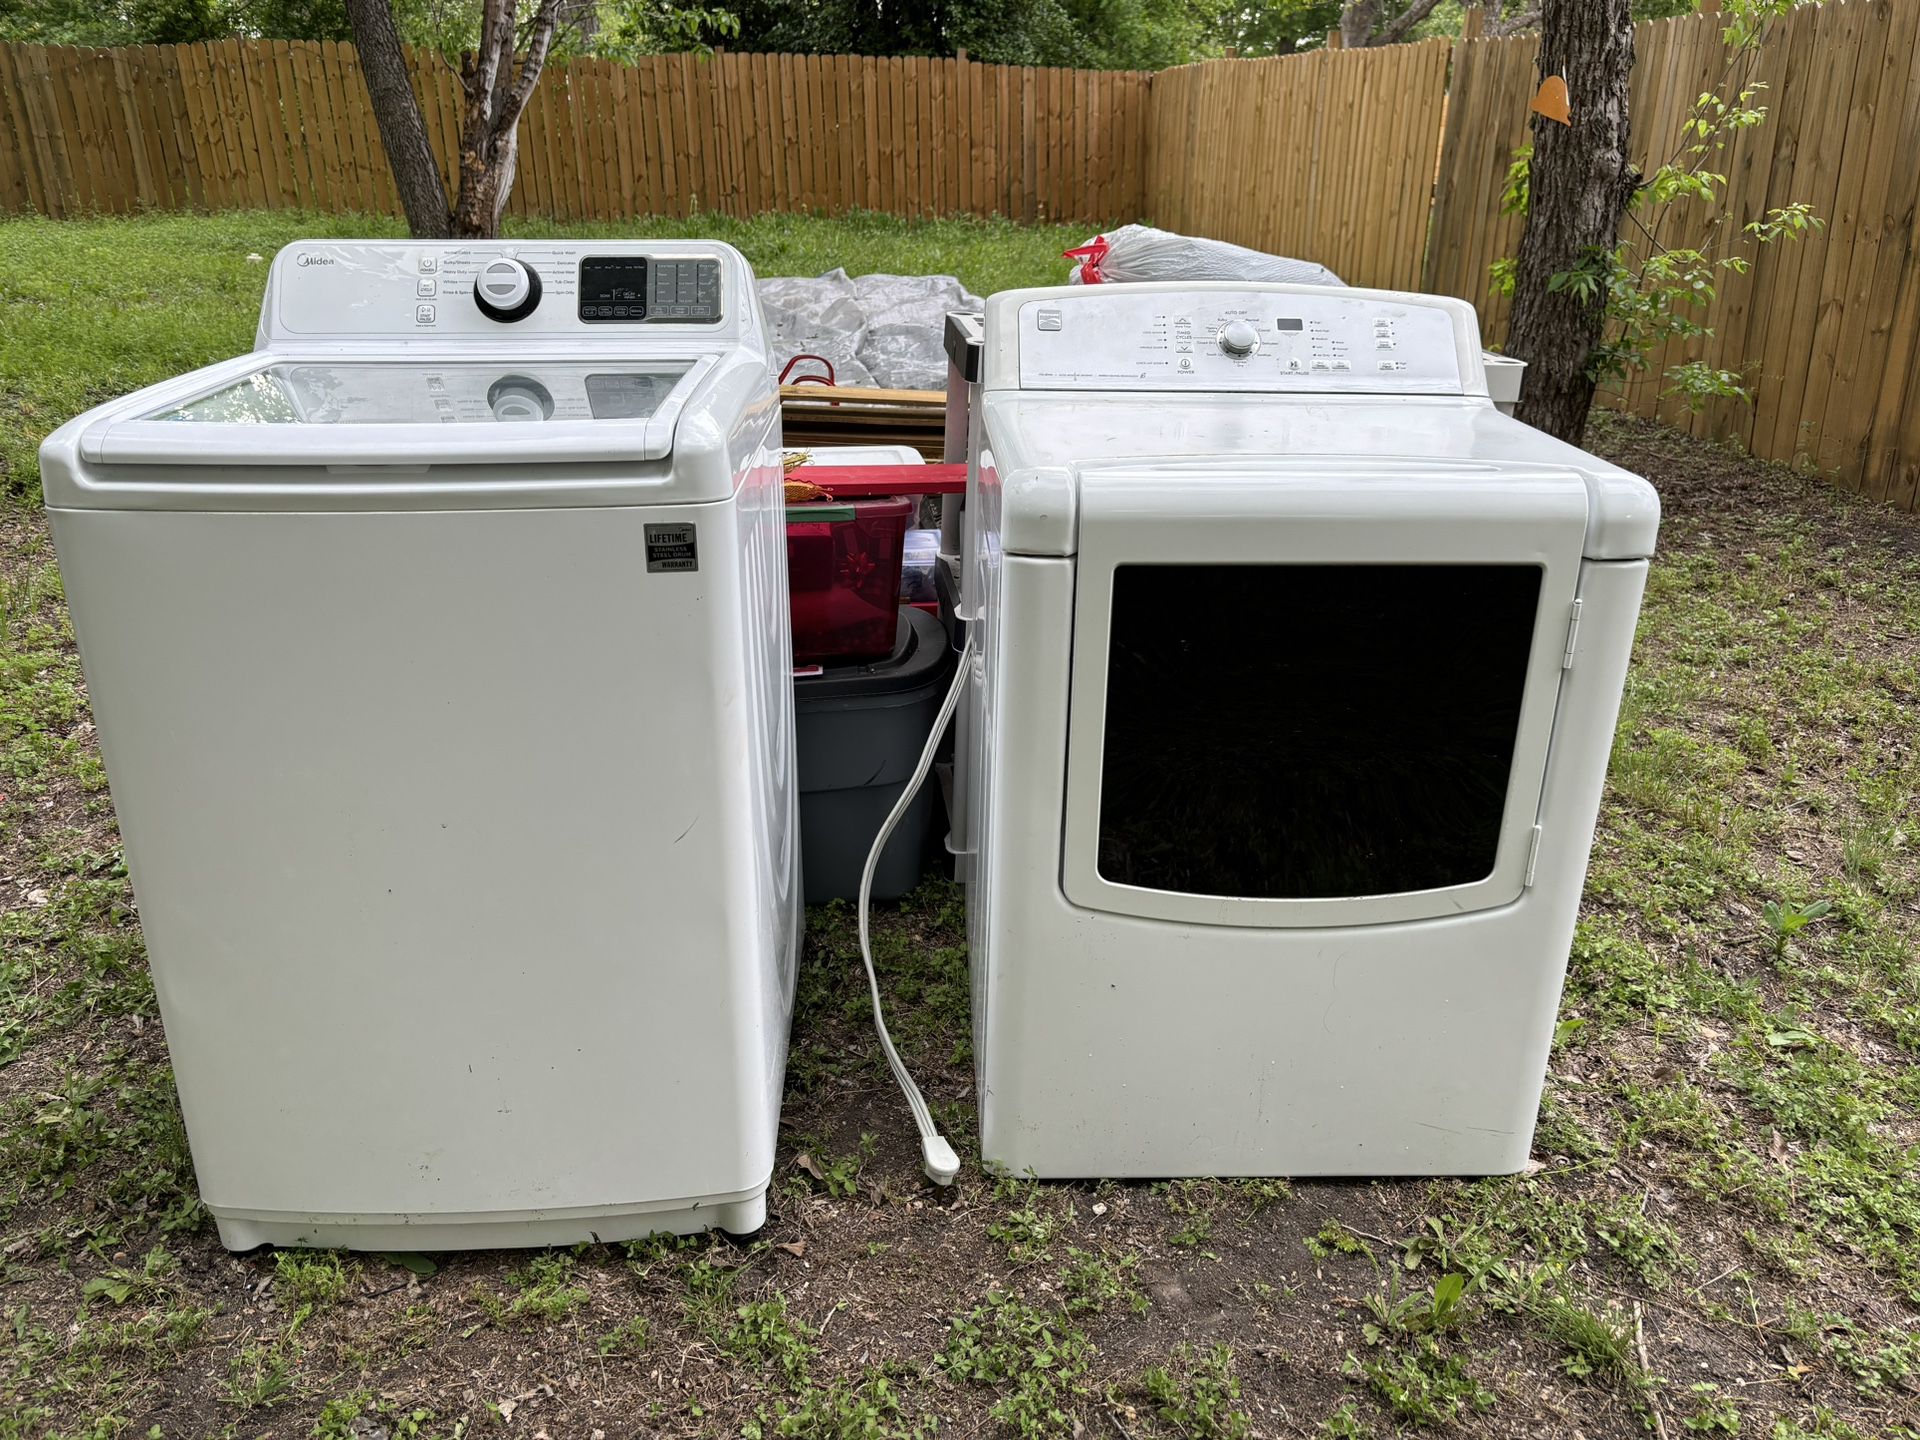 Kenmore Dryer and Midea Washer